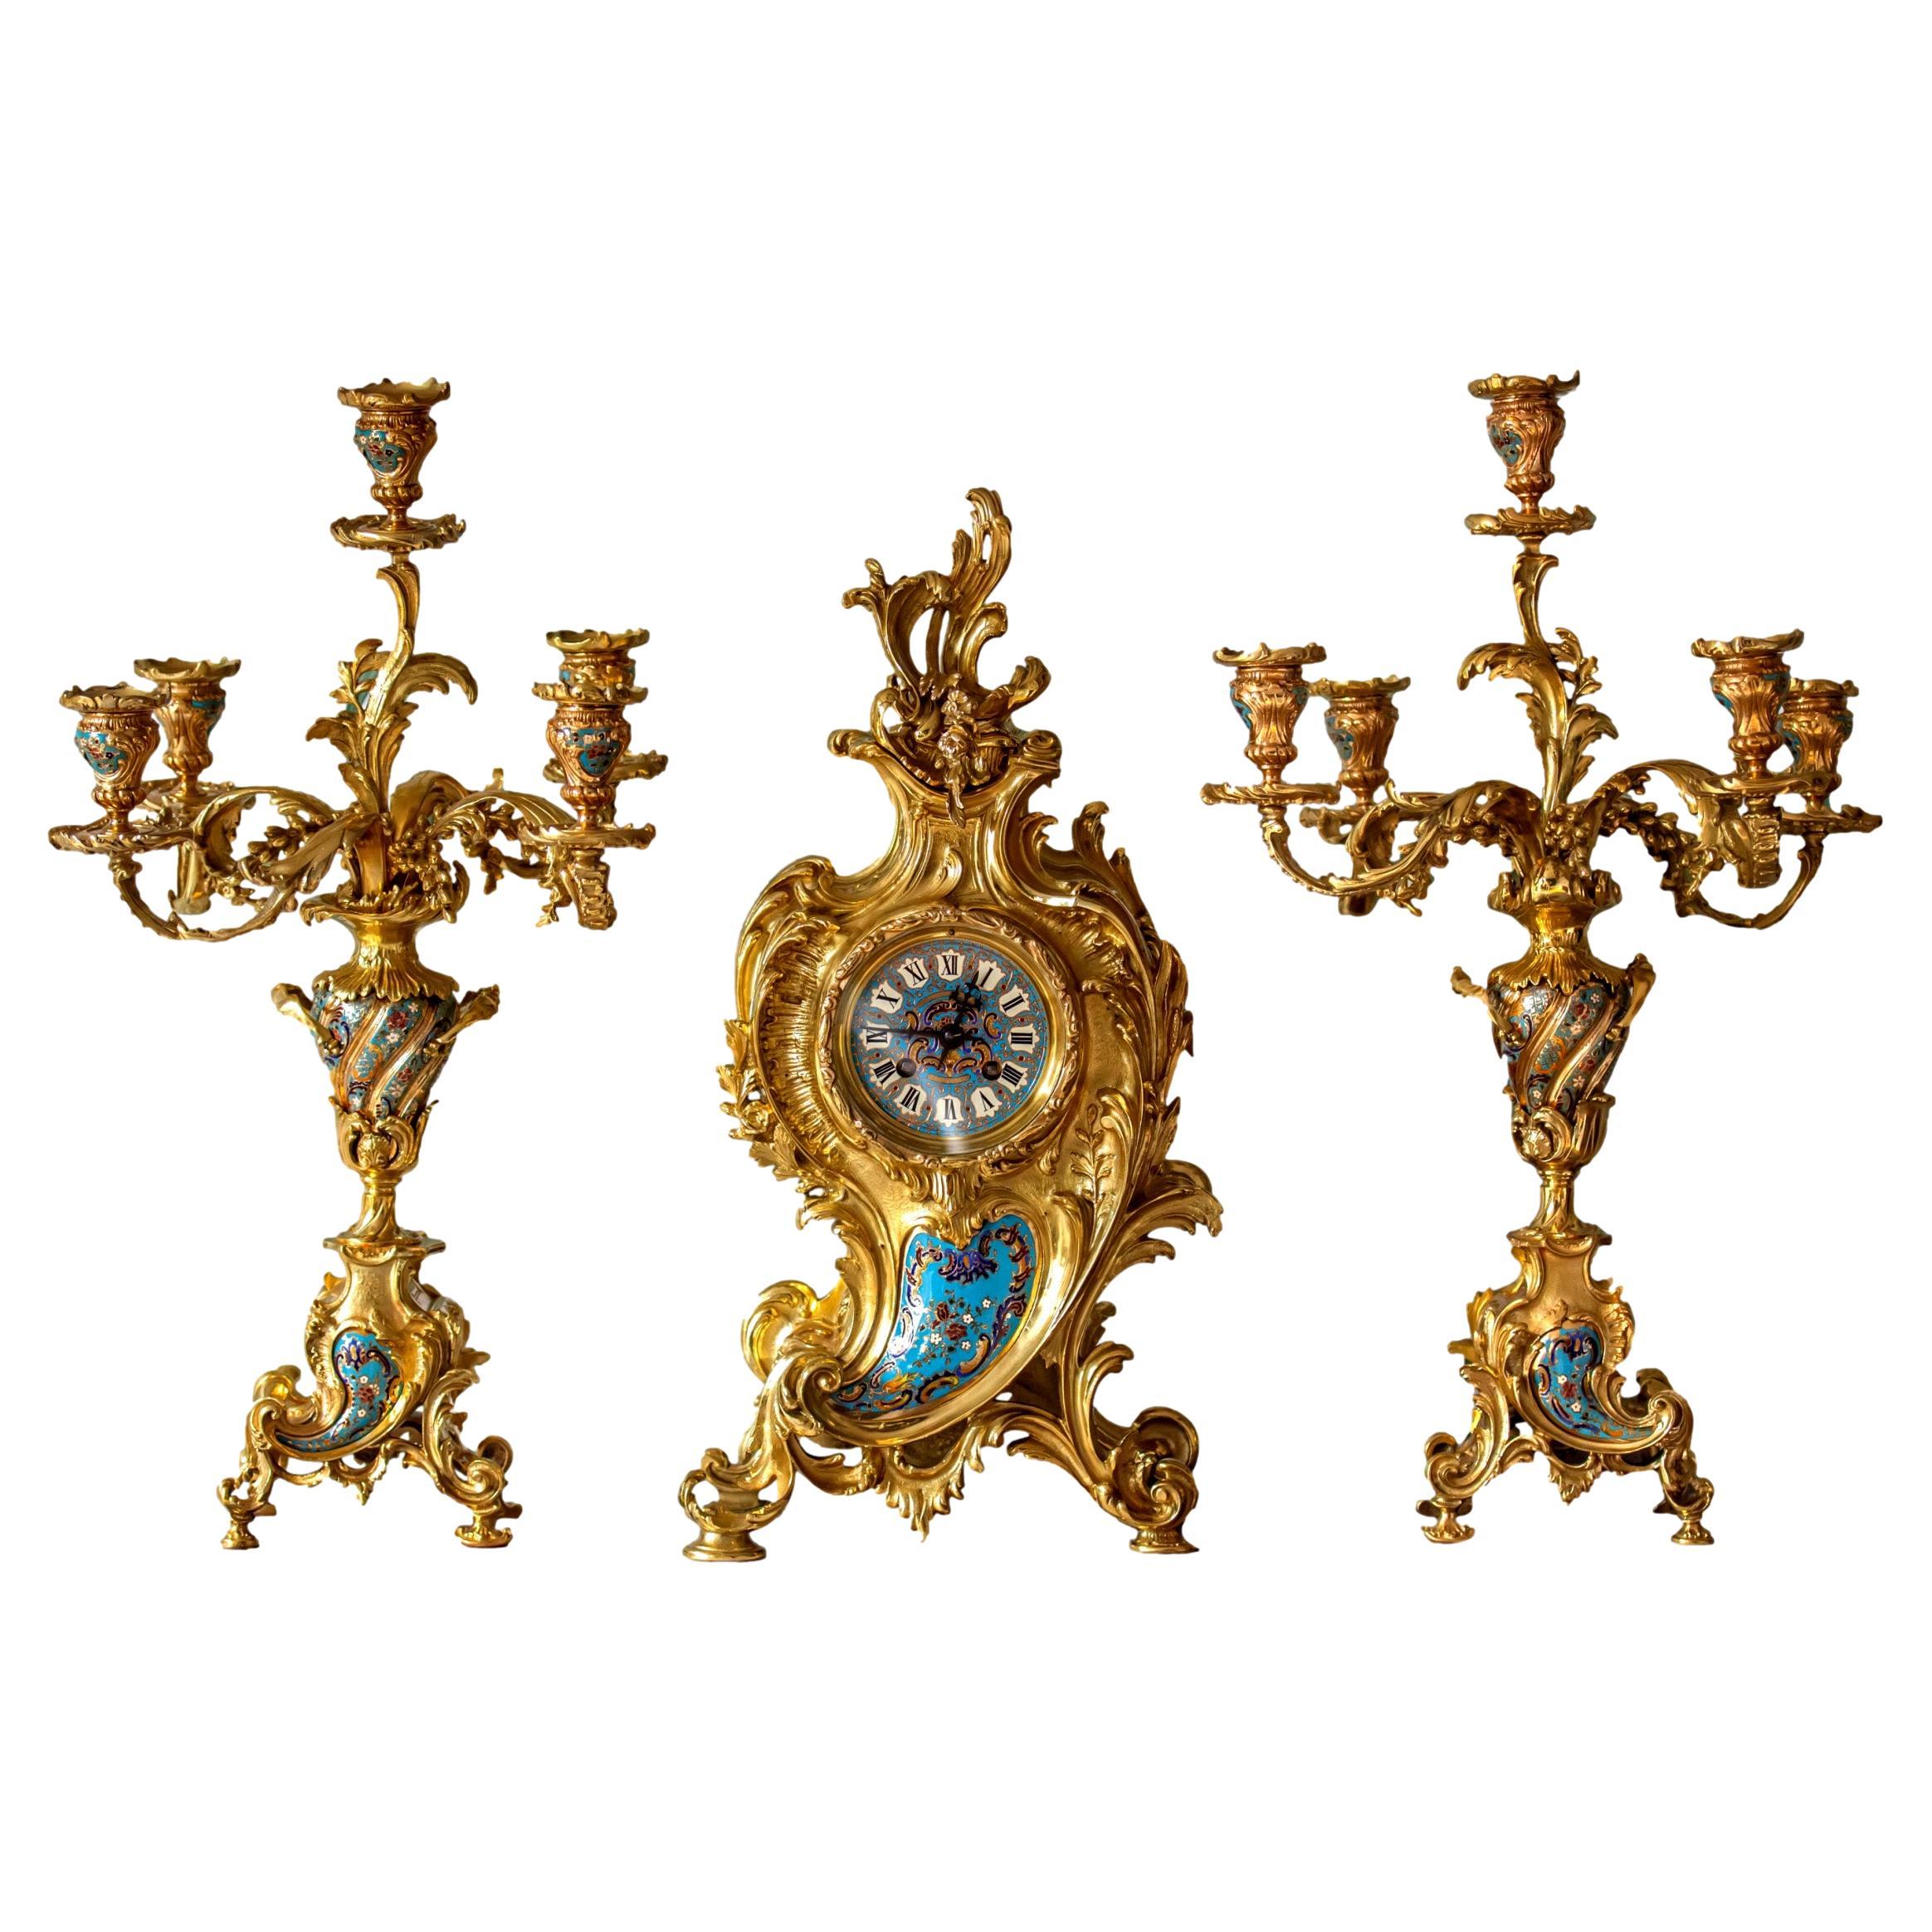 French Gilded & Champleve Clock Garniture